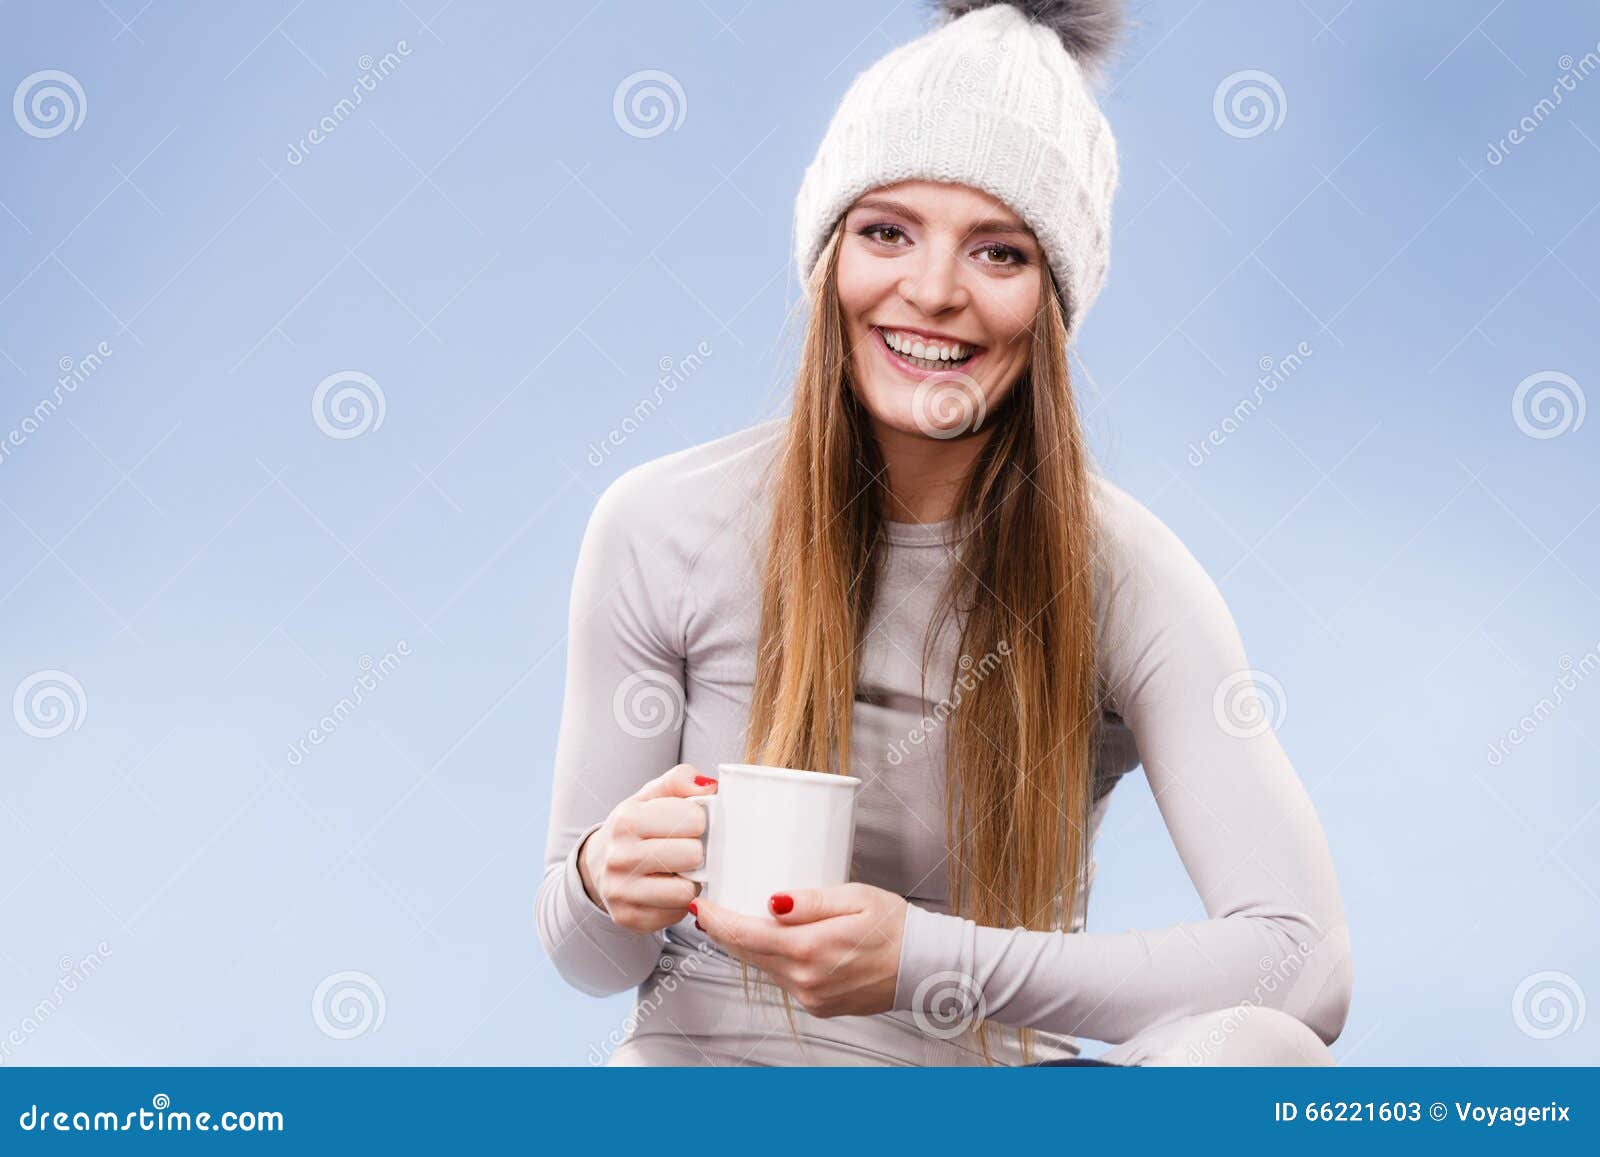 Girl in Thermal Underwear Drinking Tea Stock Image - Image of smiling ...